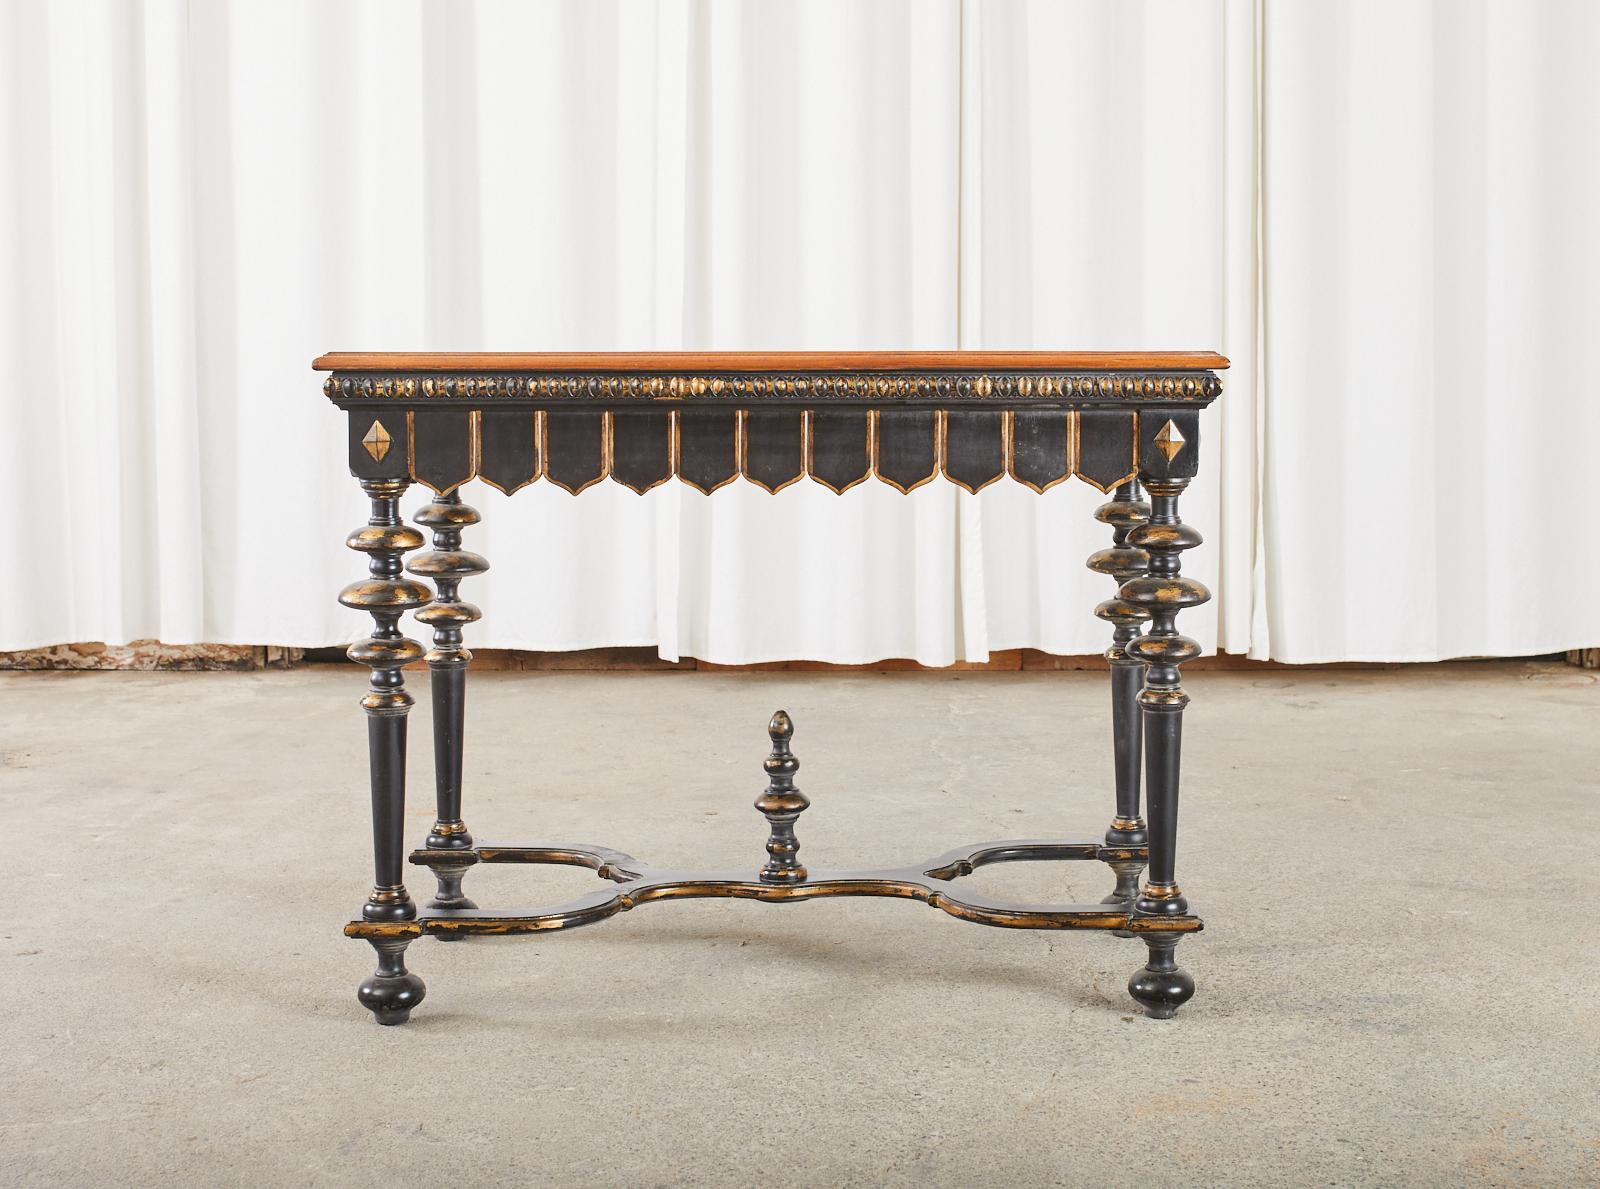 Distinctive ebonized console table or library table crafted in the Portuguese baroque style. The table features a gadrooned border above the frieze with geometric shaped moldings below. The trestle style base has dramatic turned legs ending with